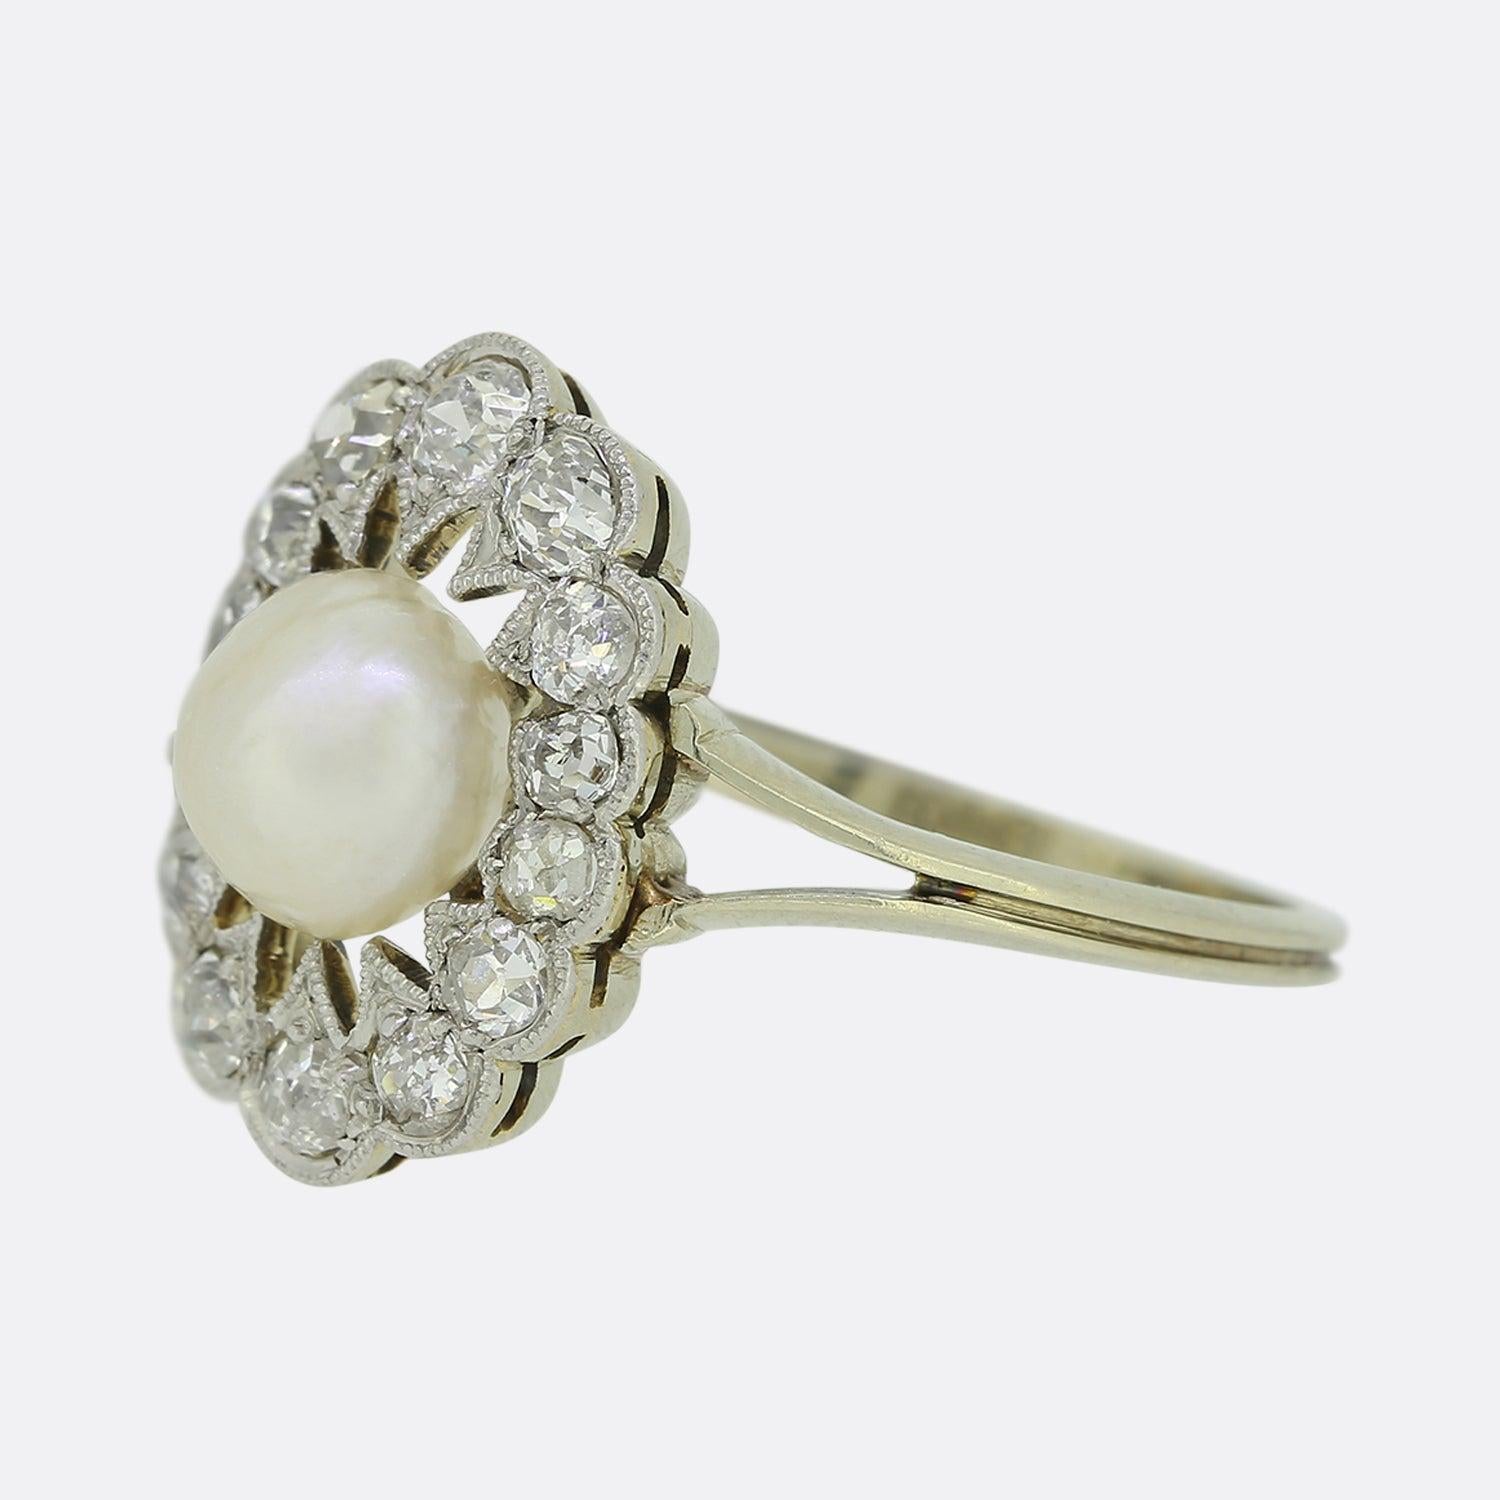 This is a superb 18ct gold pearl and diamond cluster ring. Set upon a platinum head, the central natural pearl possesses a wonderful lustre whilst the encompassing stones which circulate the outer edge are bright white sparkling old cut diamonds.